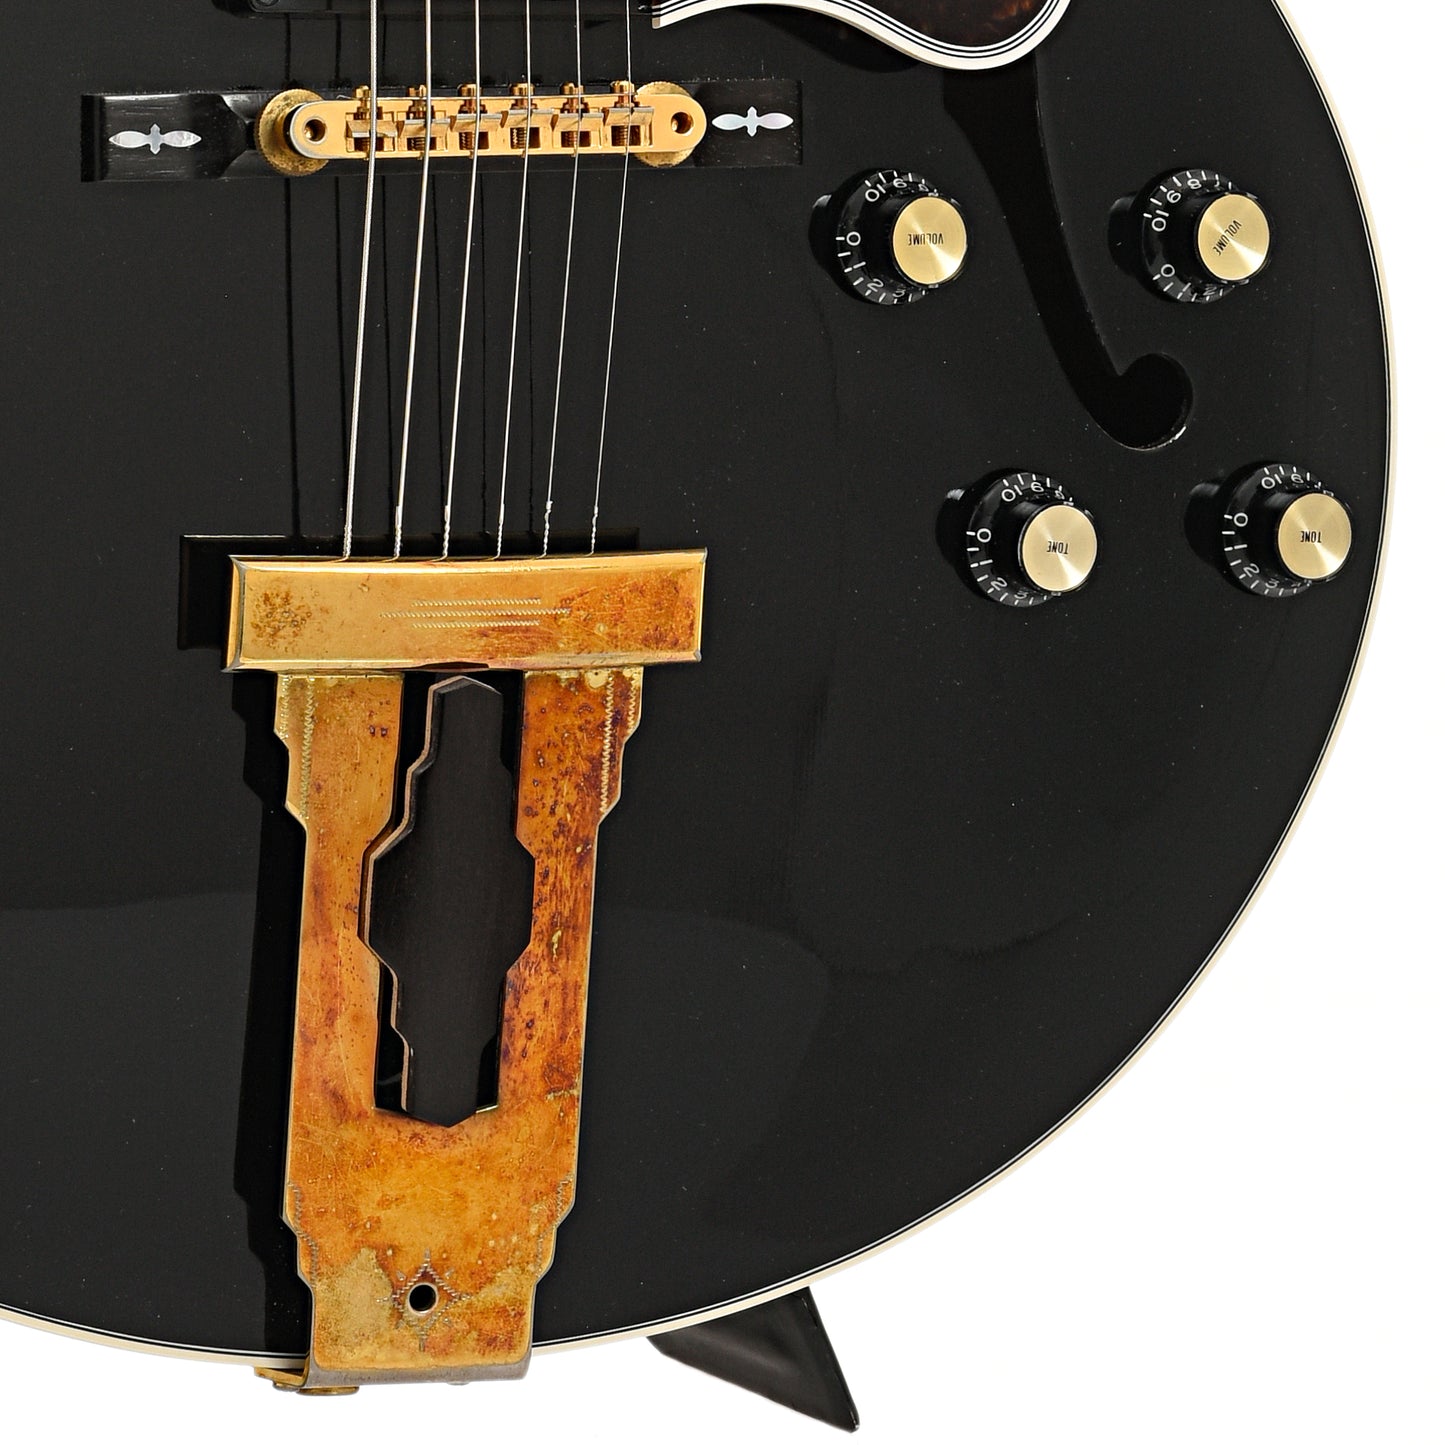 tailpiece, controls and bridge of Gibson L-4 CES Hollowbody 